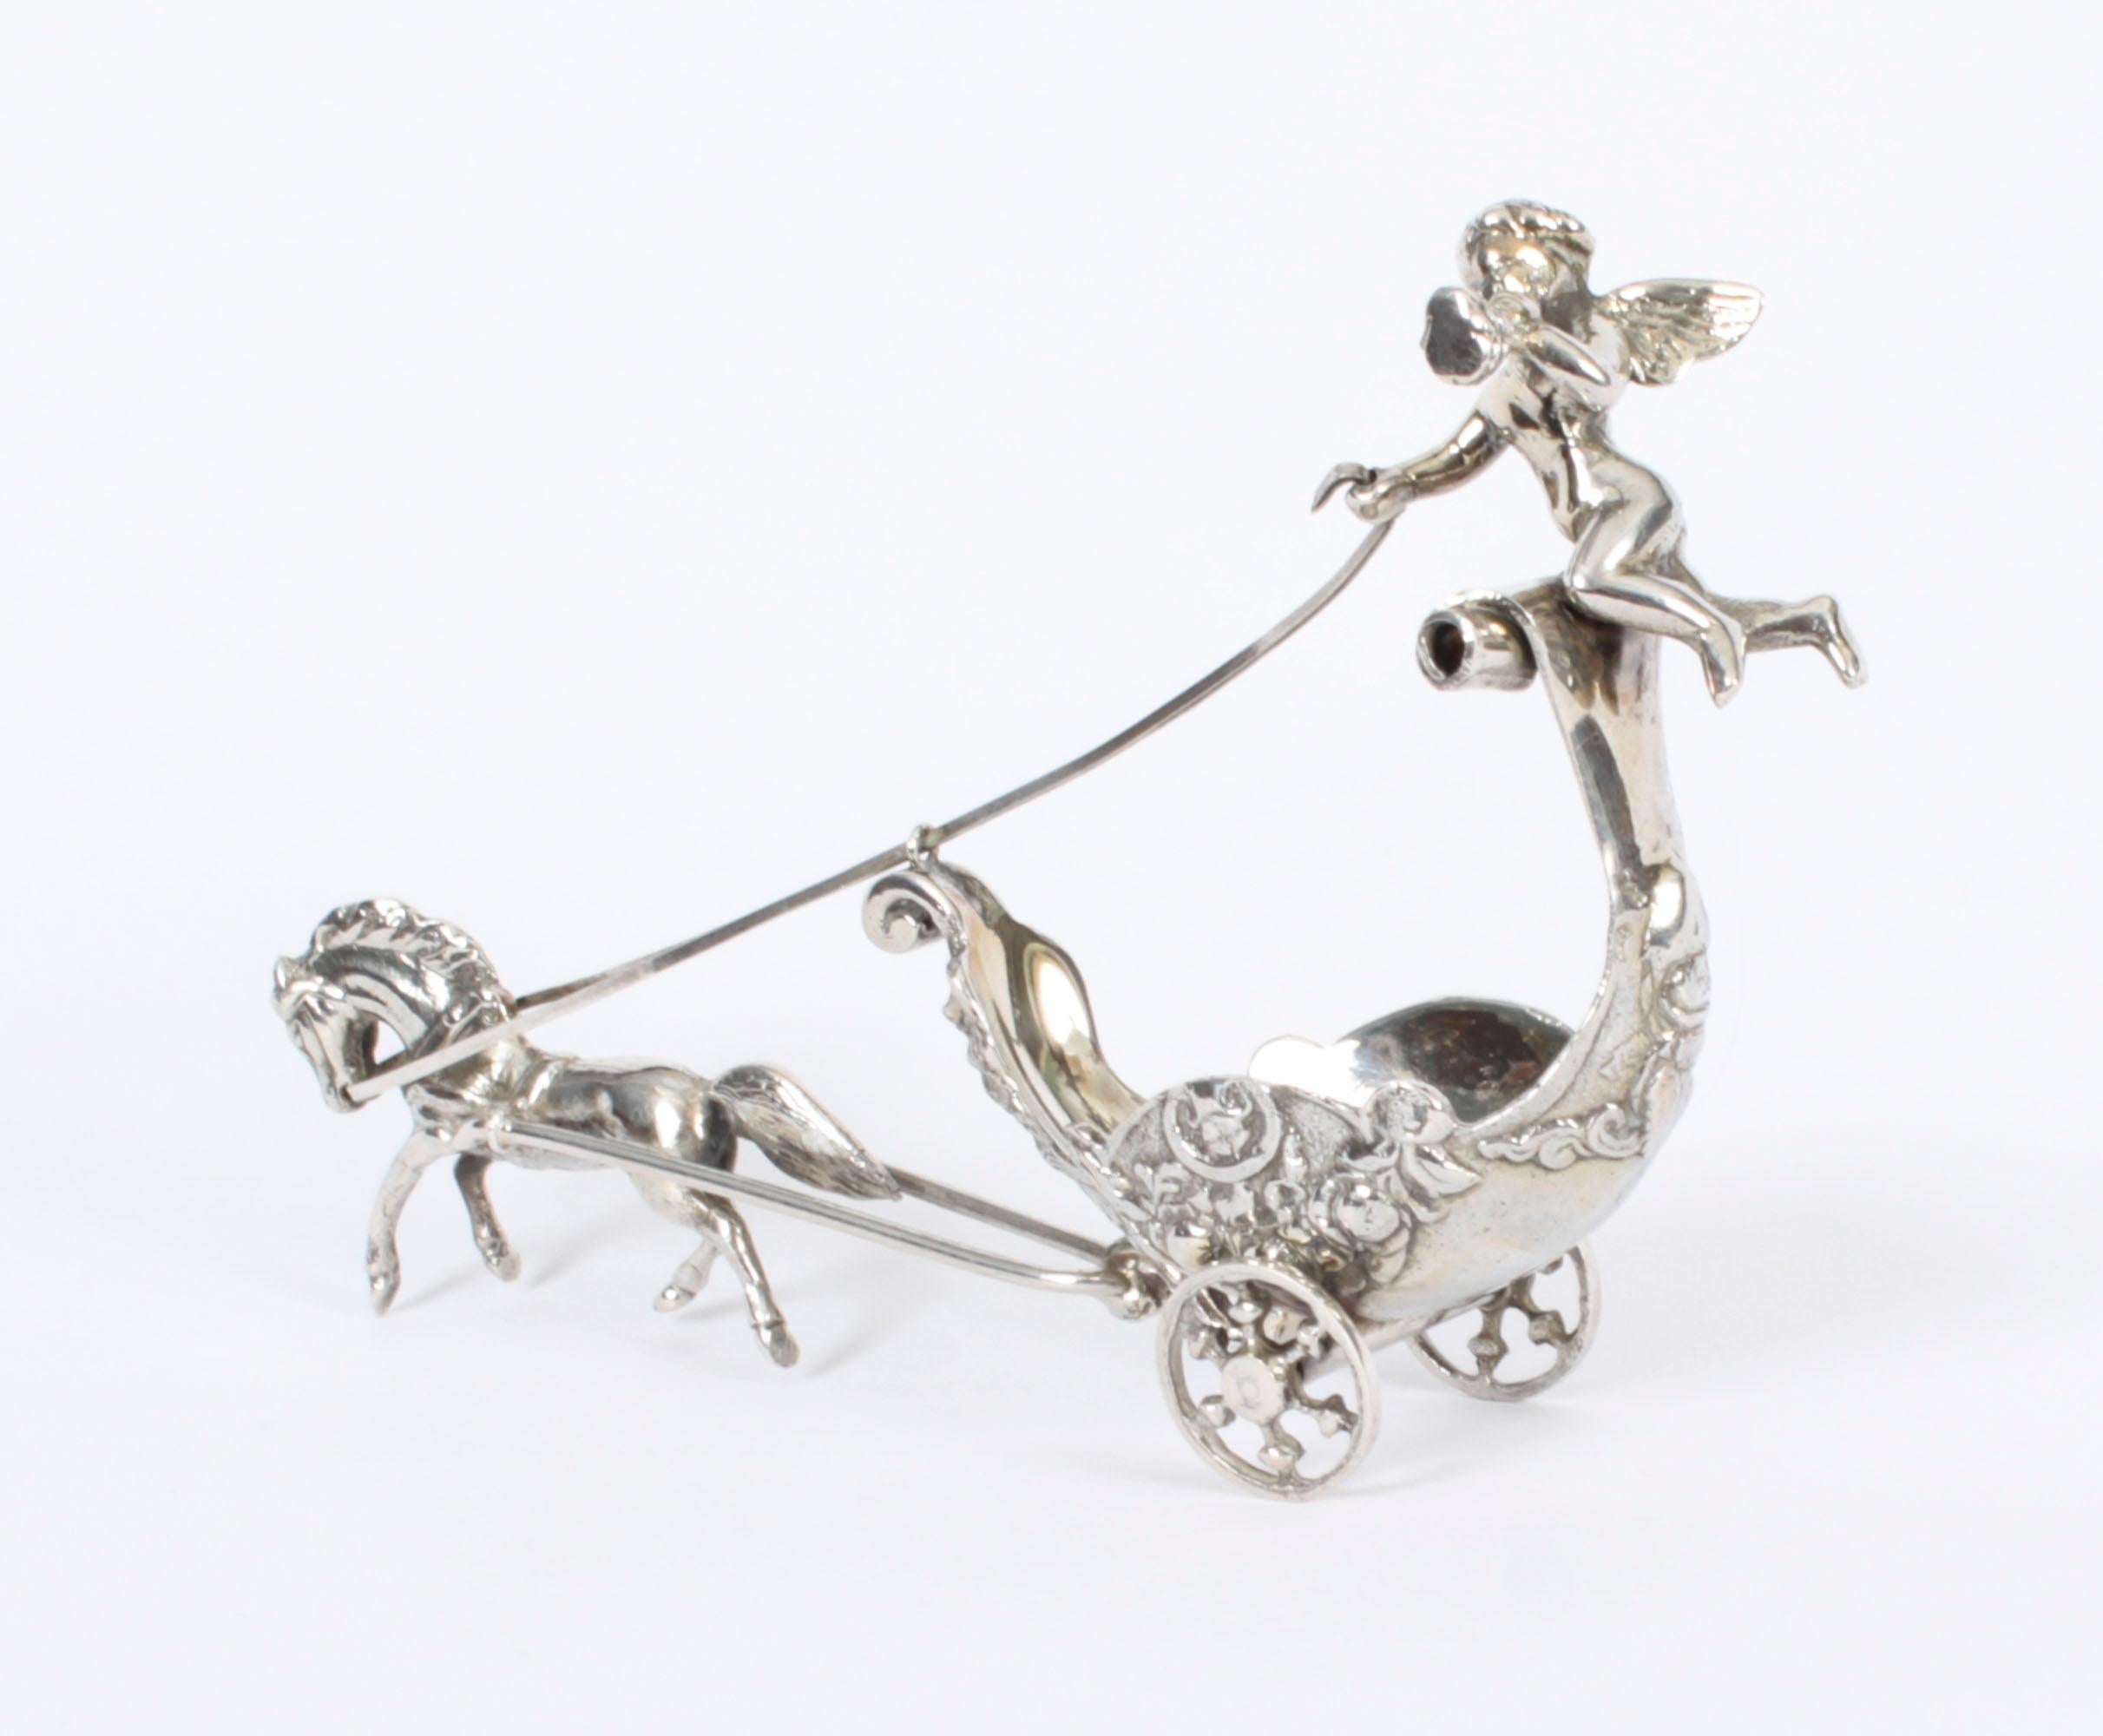 This is a wonderful antique Italian .800 silver cherub horse drawn chariot salt, Circa 1900 in date.

Will look amazing on your dining table.

Condition:
In excellent condition with  no dings, dents or signs of repair. Please see photos for